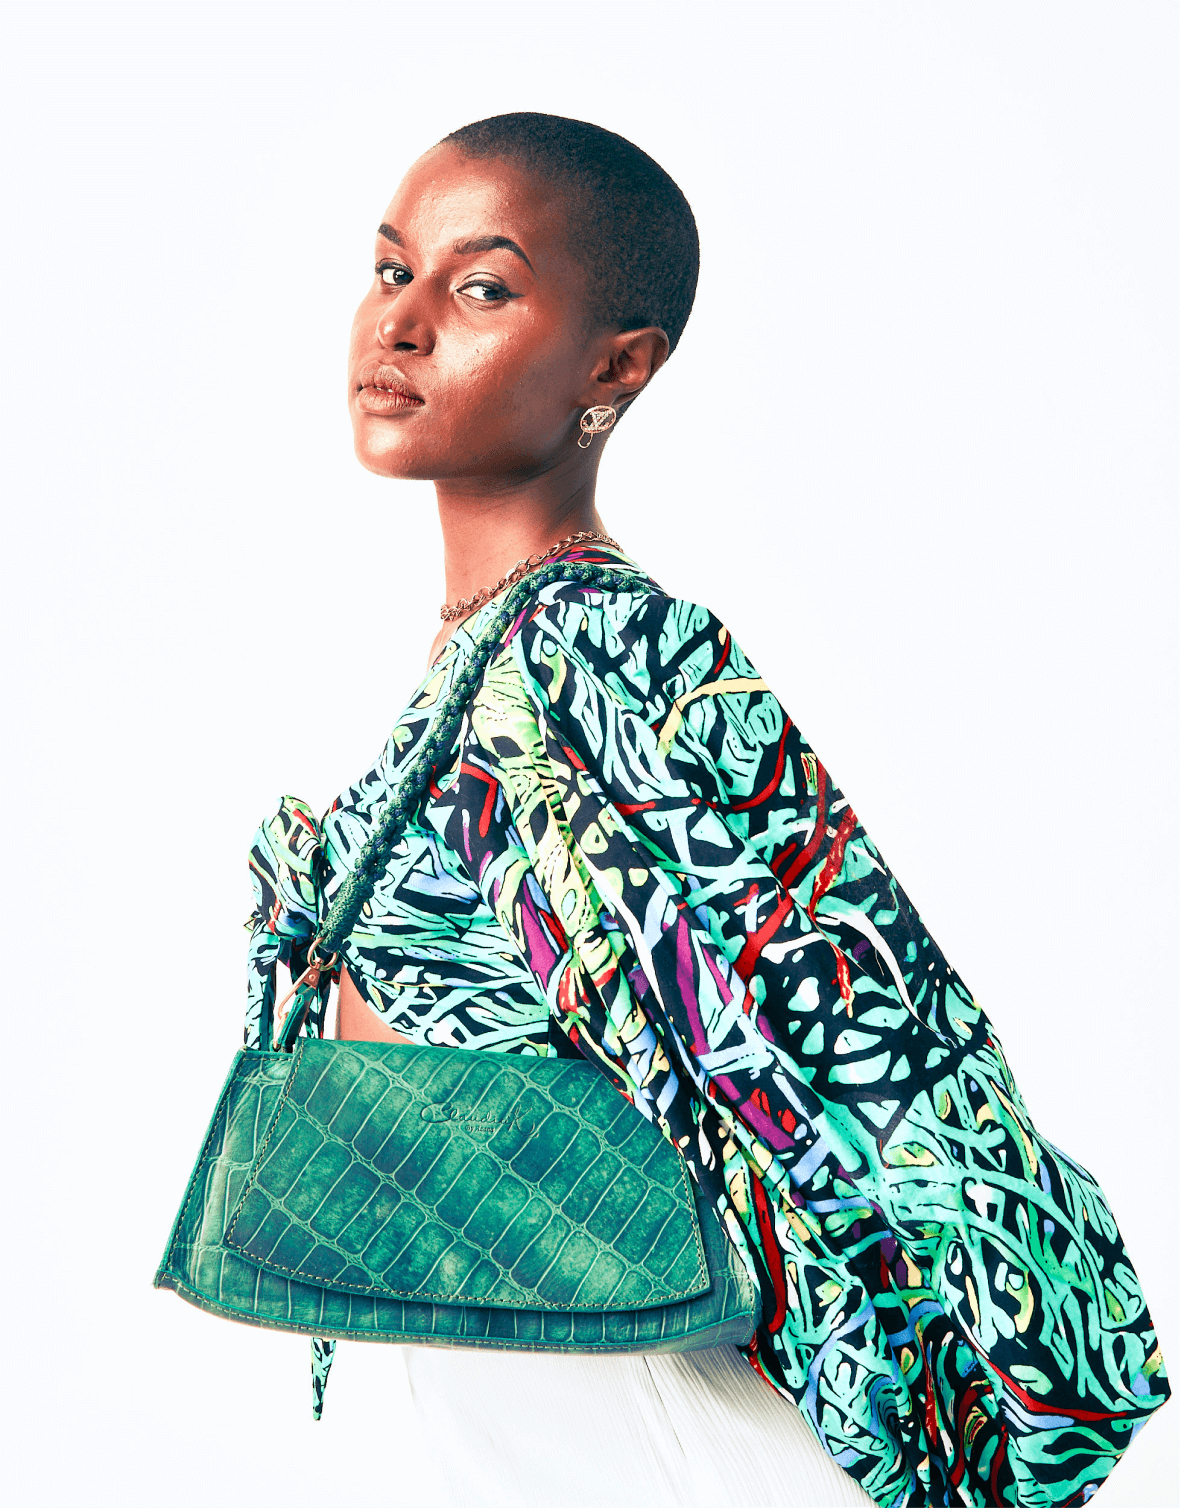 Shop the Accessories Collection on Arrai. Discover stylish, affordable clothing, jewelry, handbags and unique handmade pieces from top Kenyan & African fashion brands prioritising sustainability and quality craftsmanship. Shop Fashion online on Arrai.shop